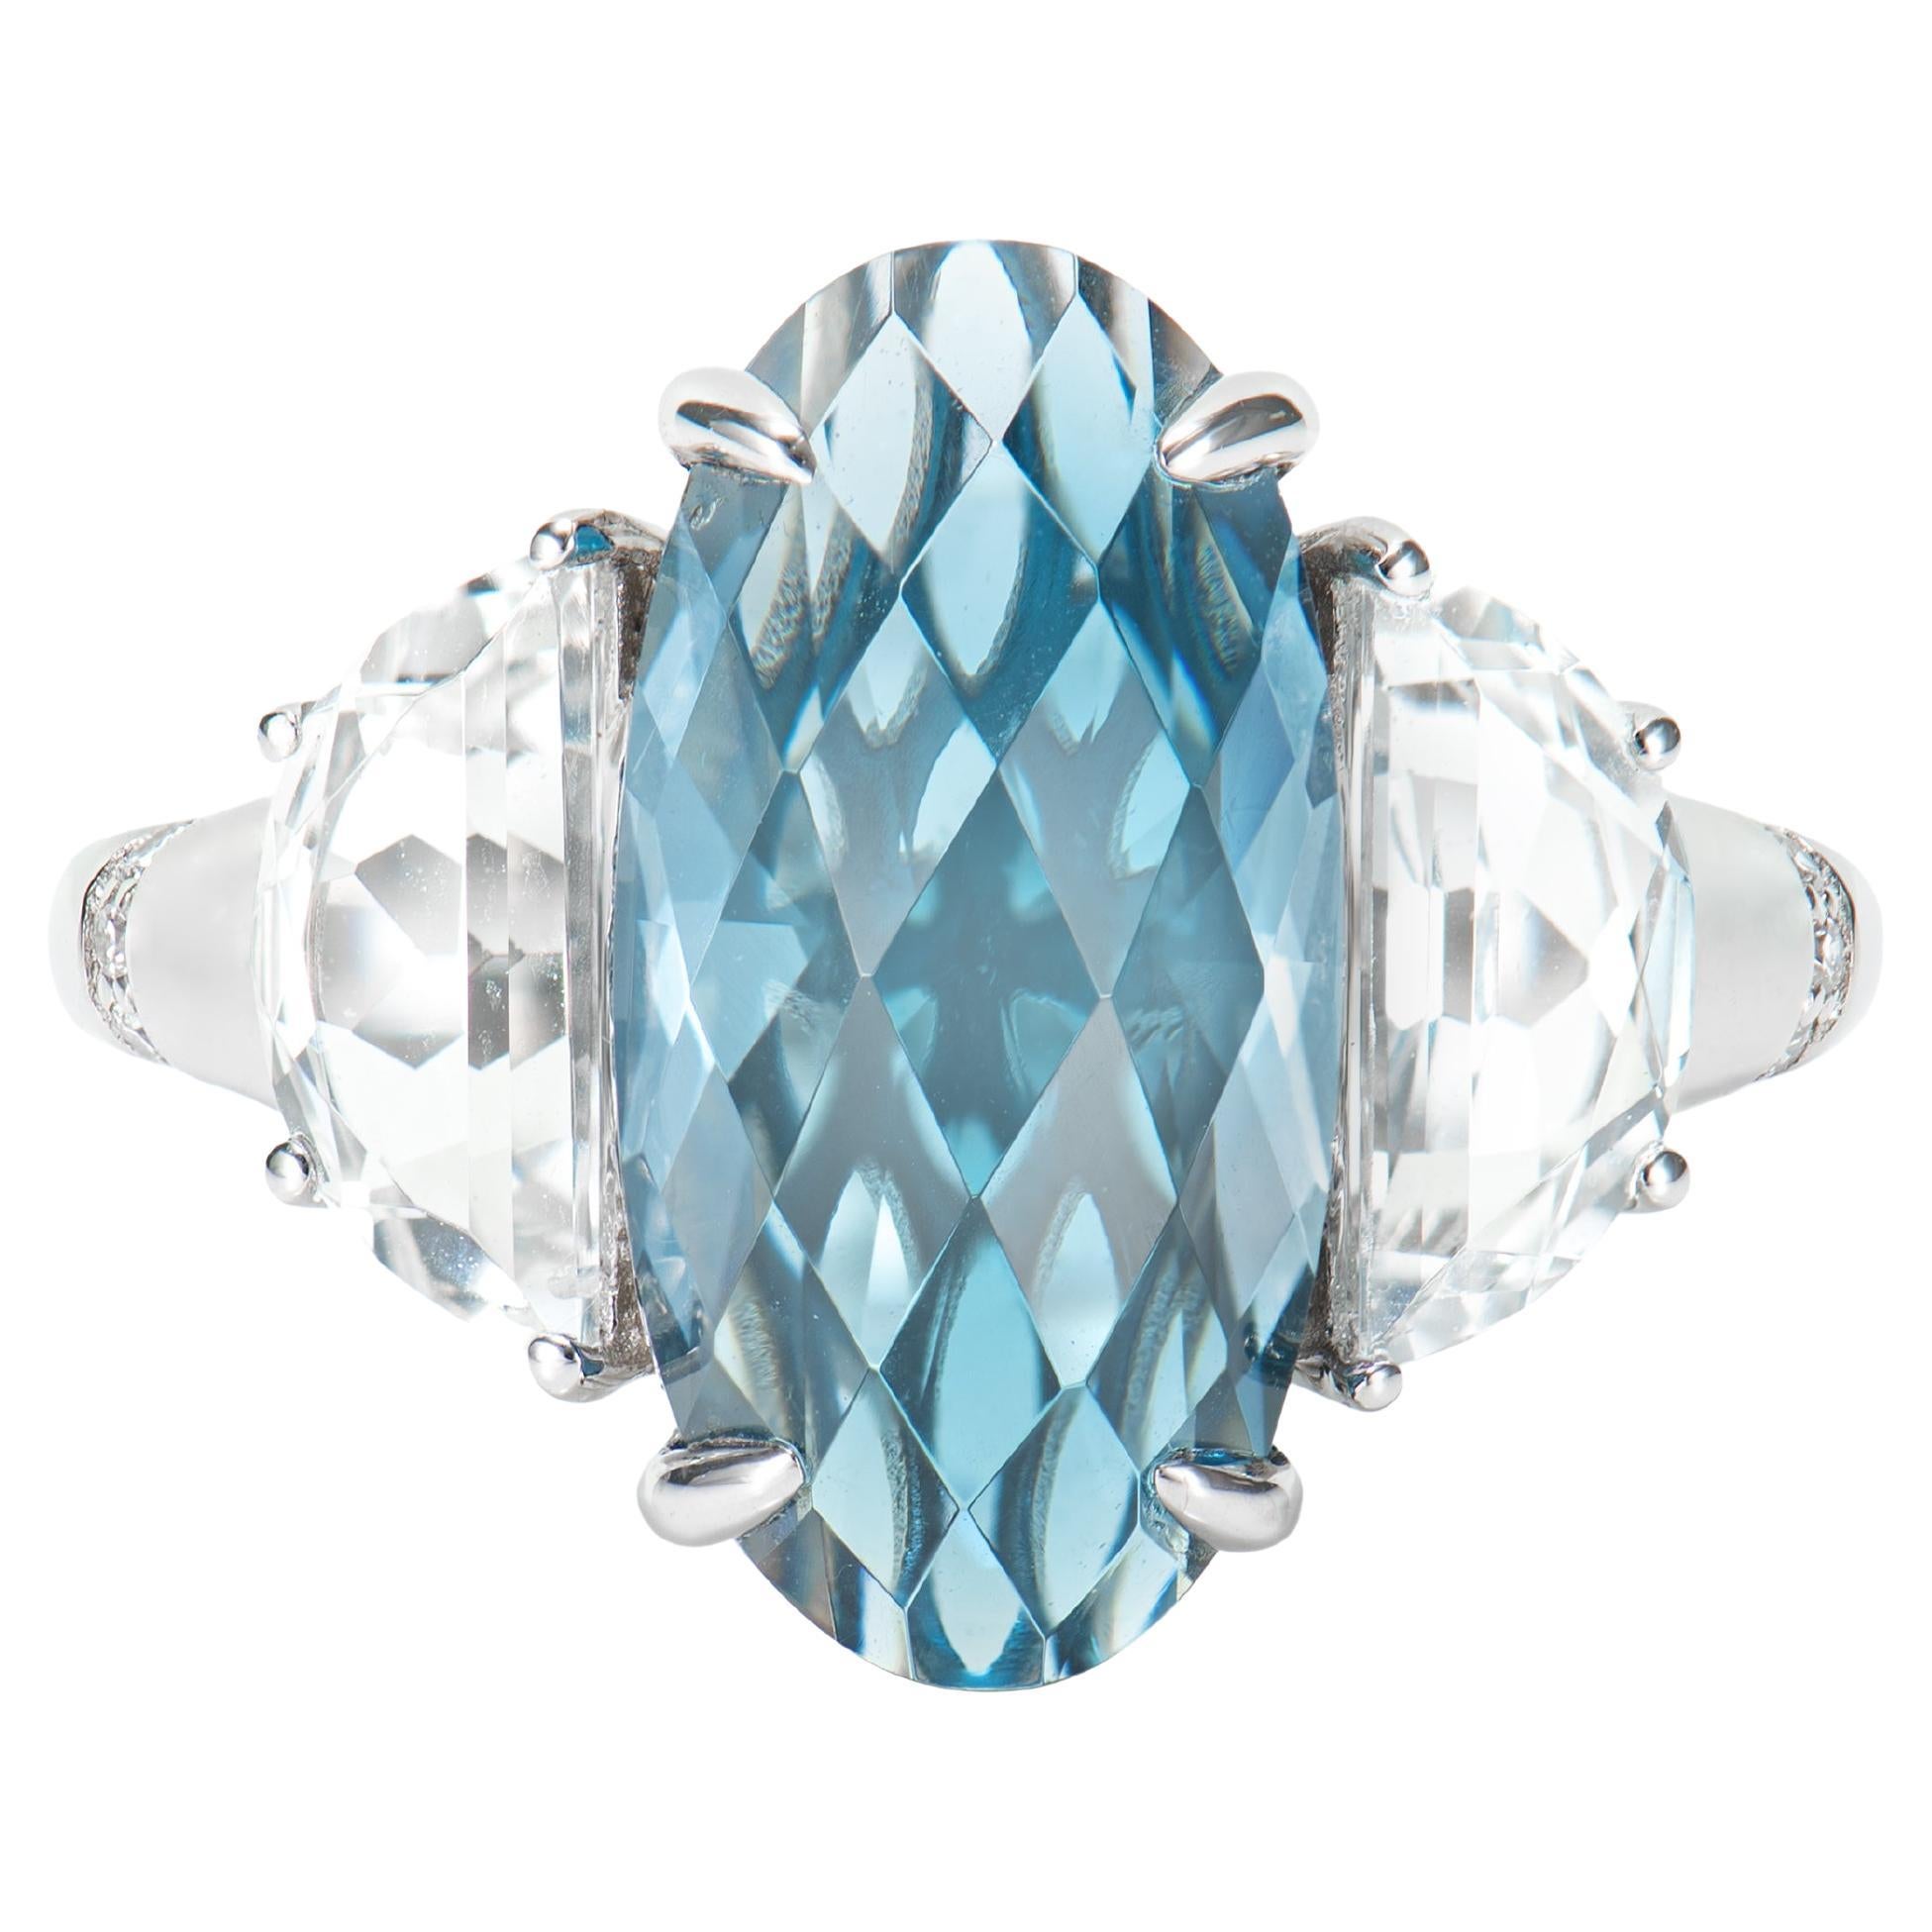 6.05 Carat London Blue Topaz Antique Ring in 18KWG with White Topaz and Diamond